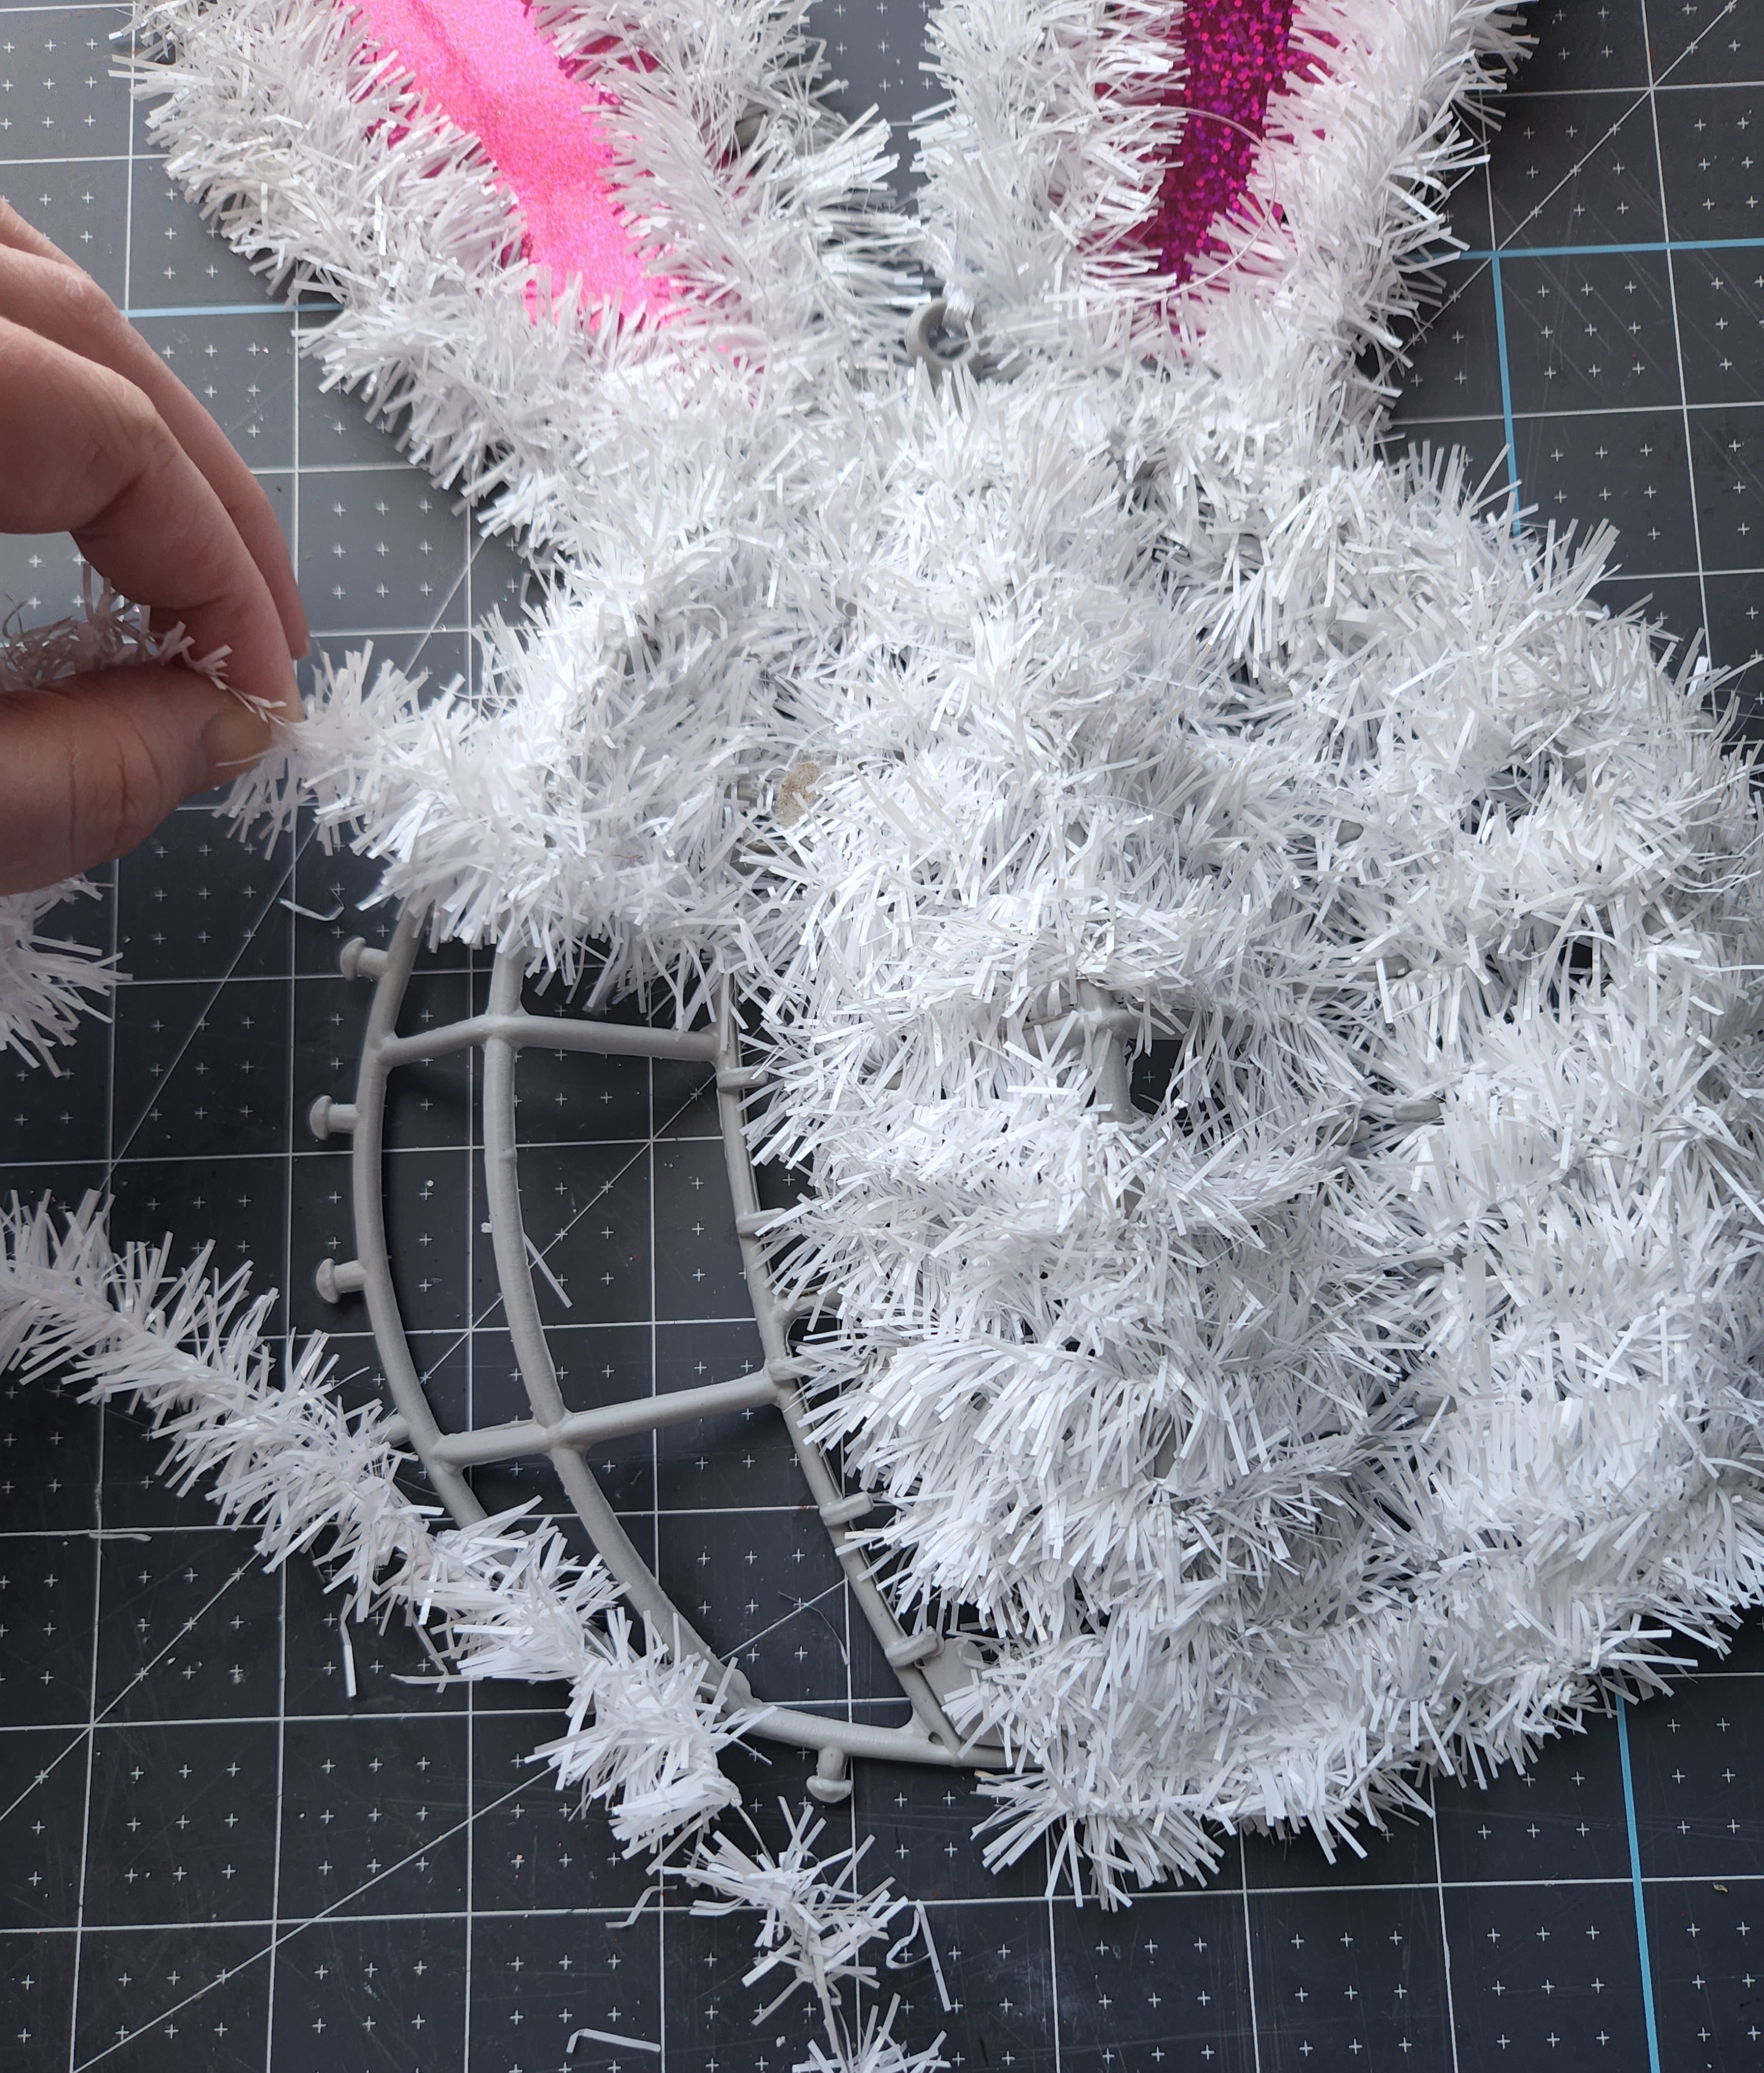 Removing the garland from a Dollar Tree bunny wreath.